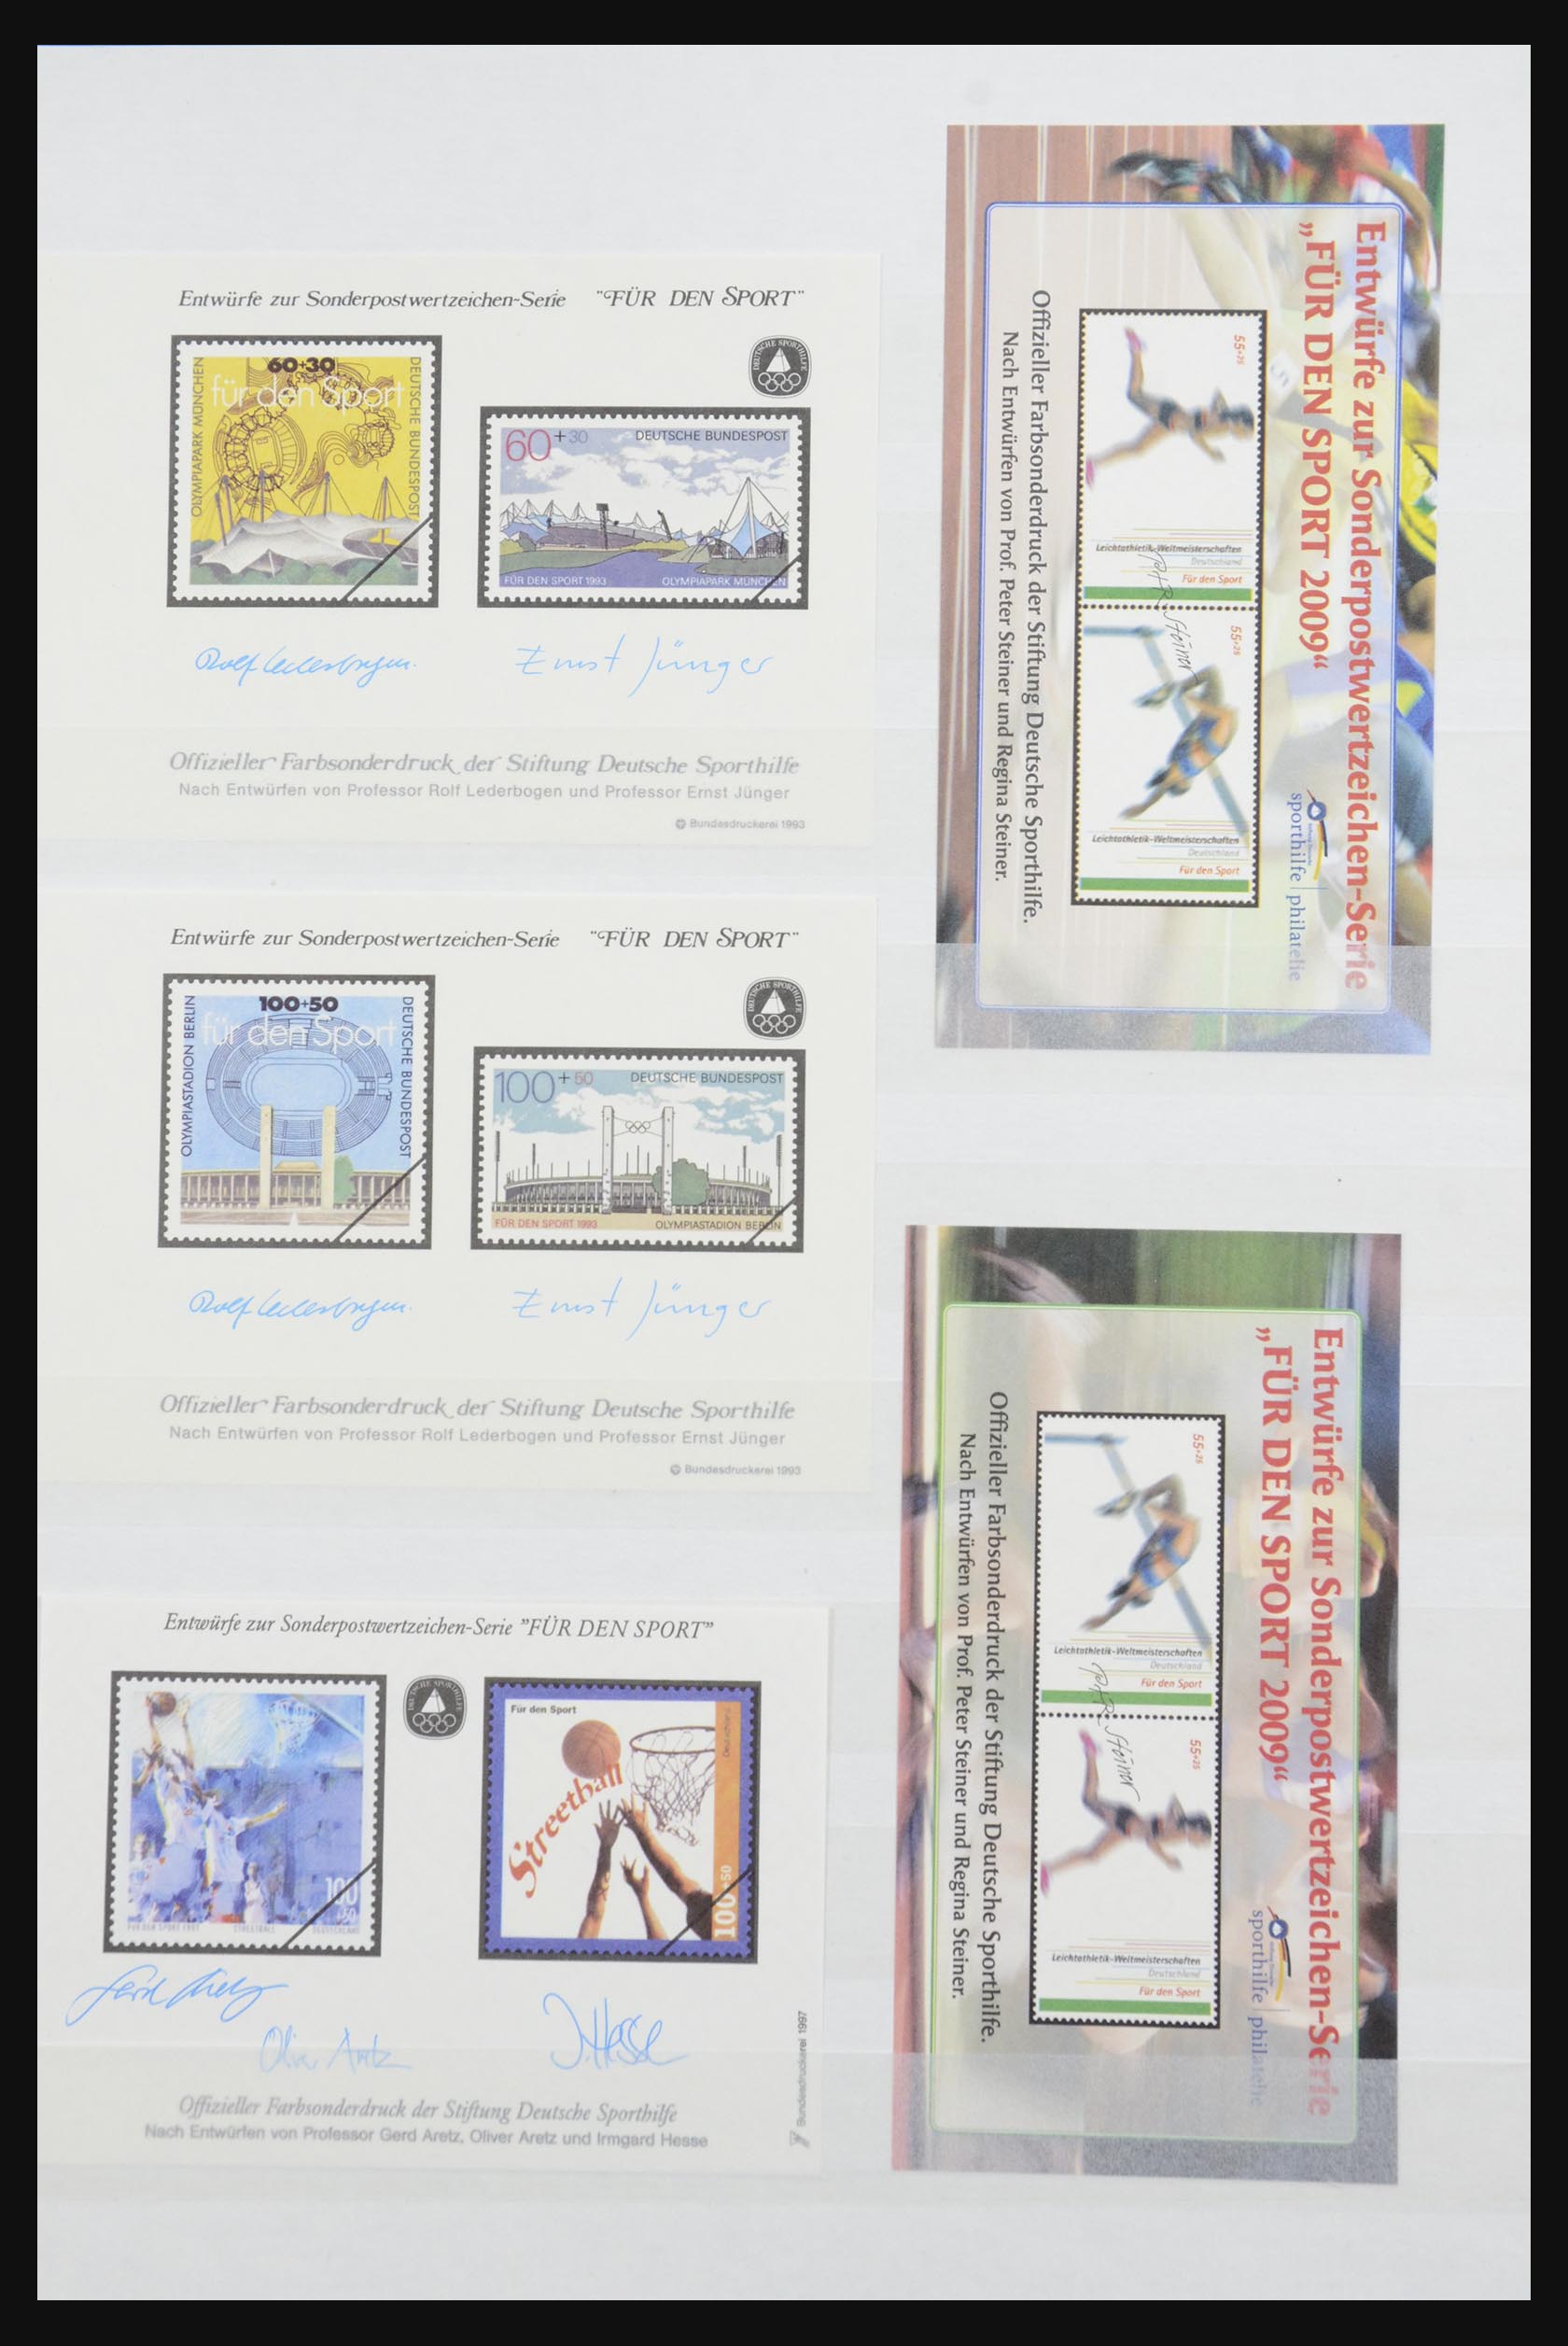 32050 014 - 32050 Bundespost special sheets 1980-2010.